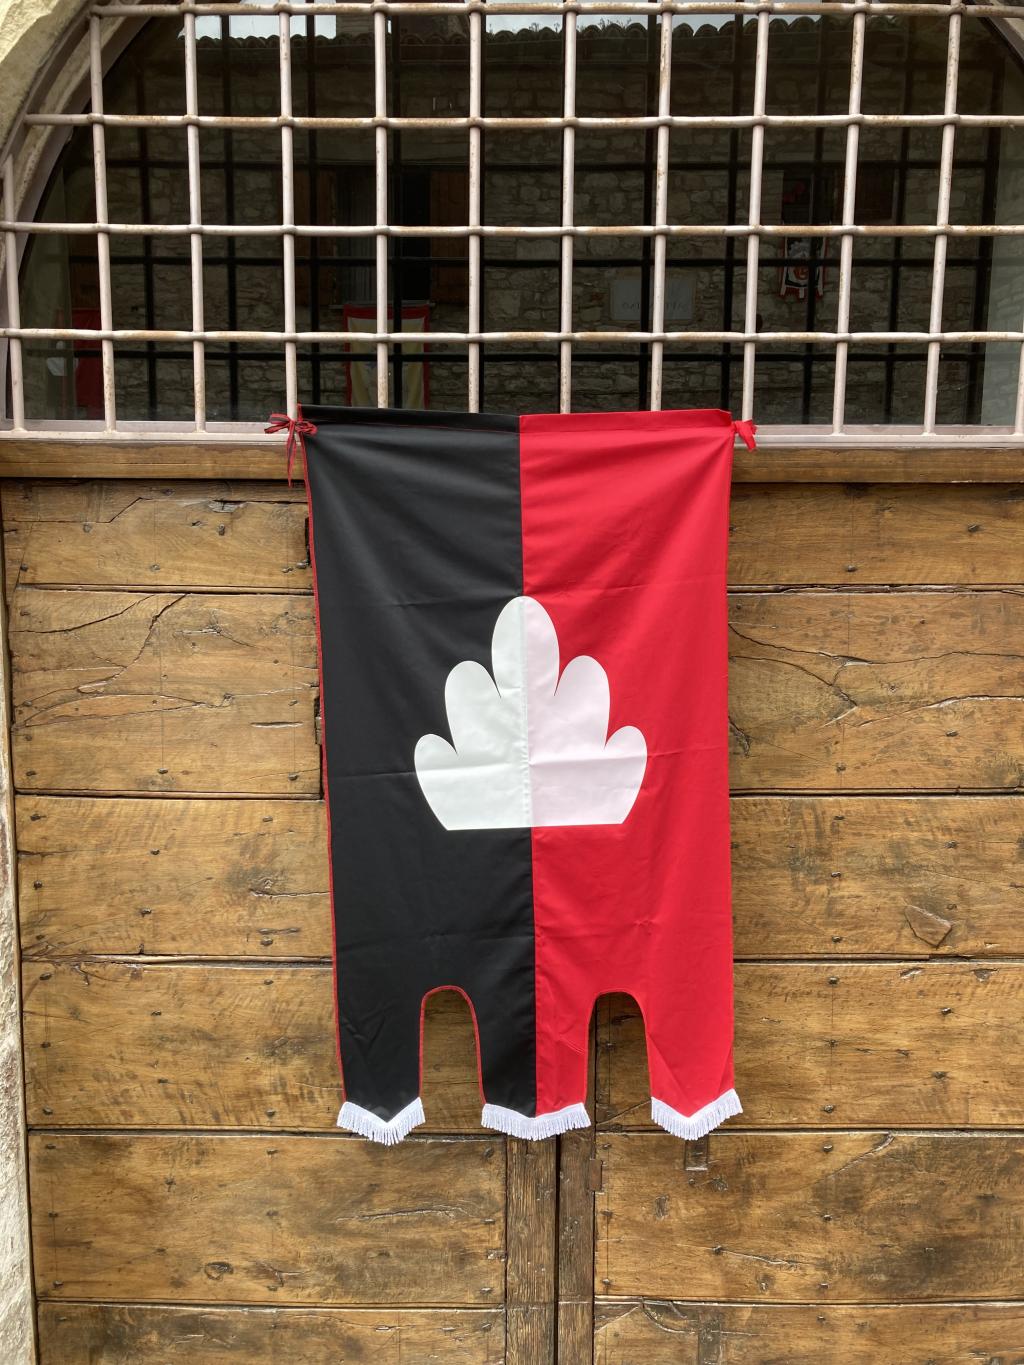 Black and red banner